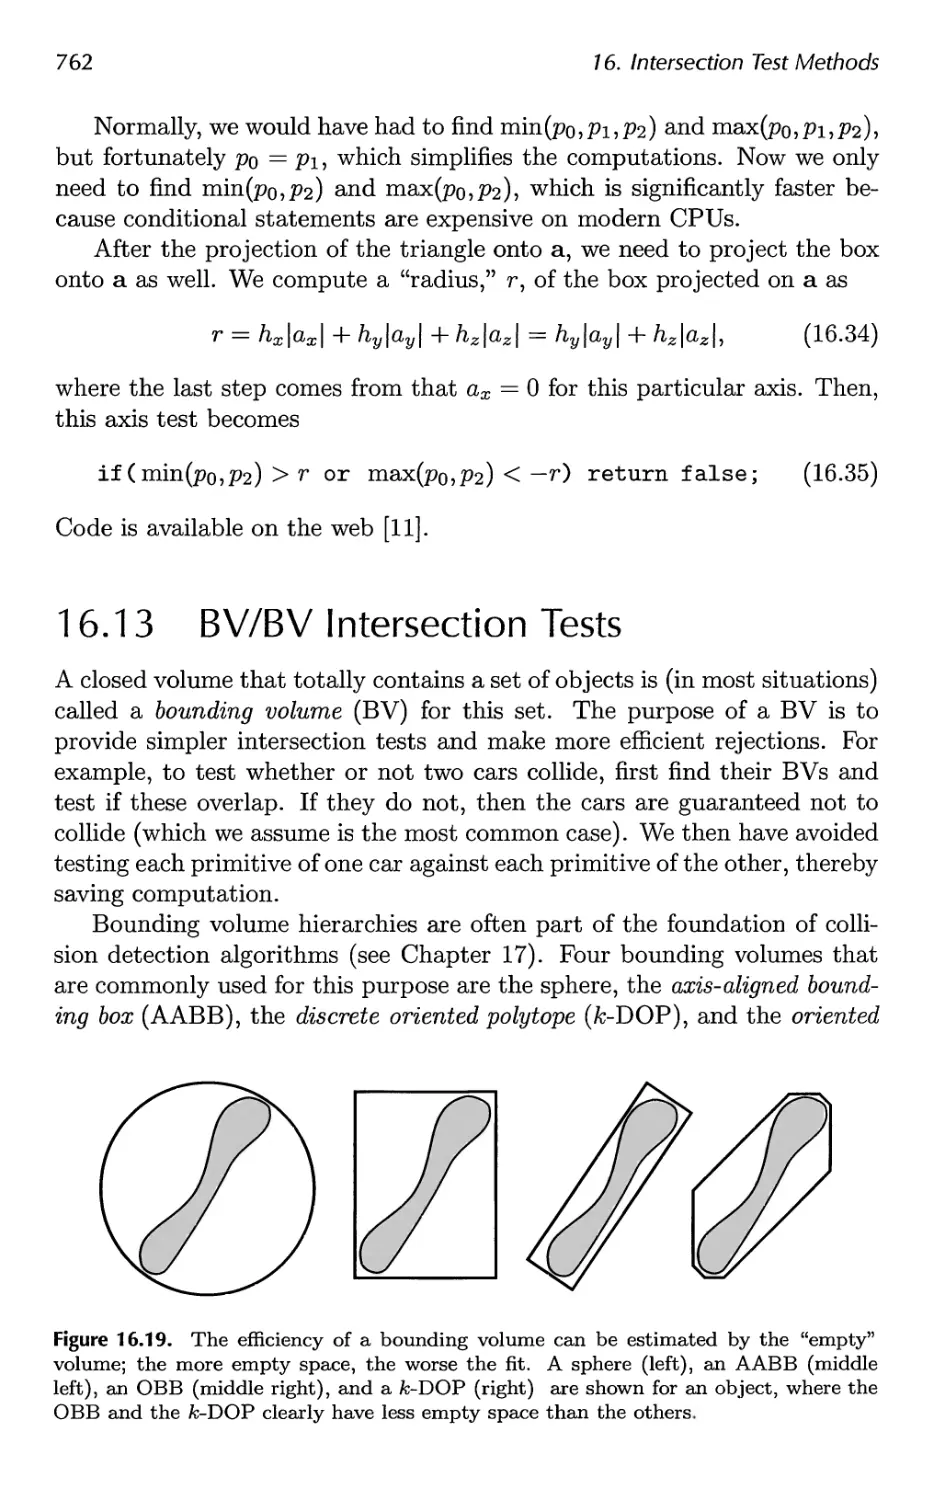 16.13 BV/BV Intersection Tests